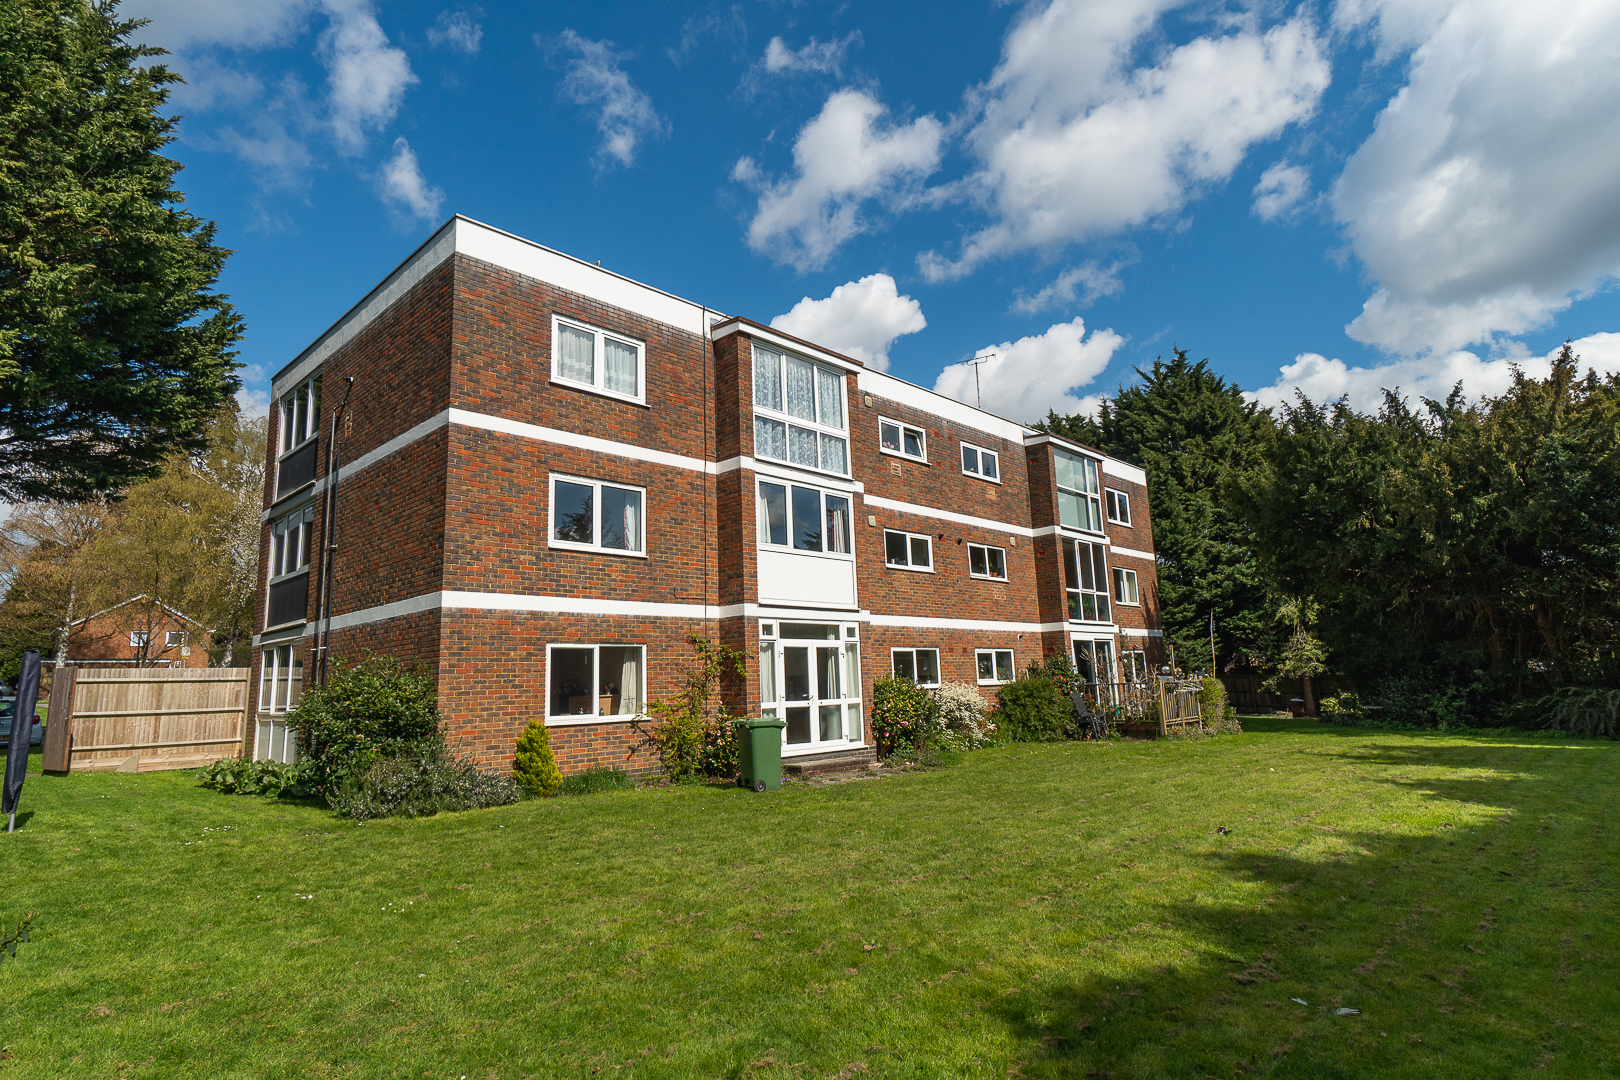 Sold In Your Area; Mulberry Court, Maidstone